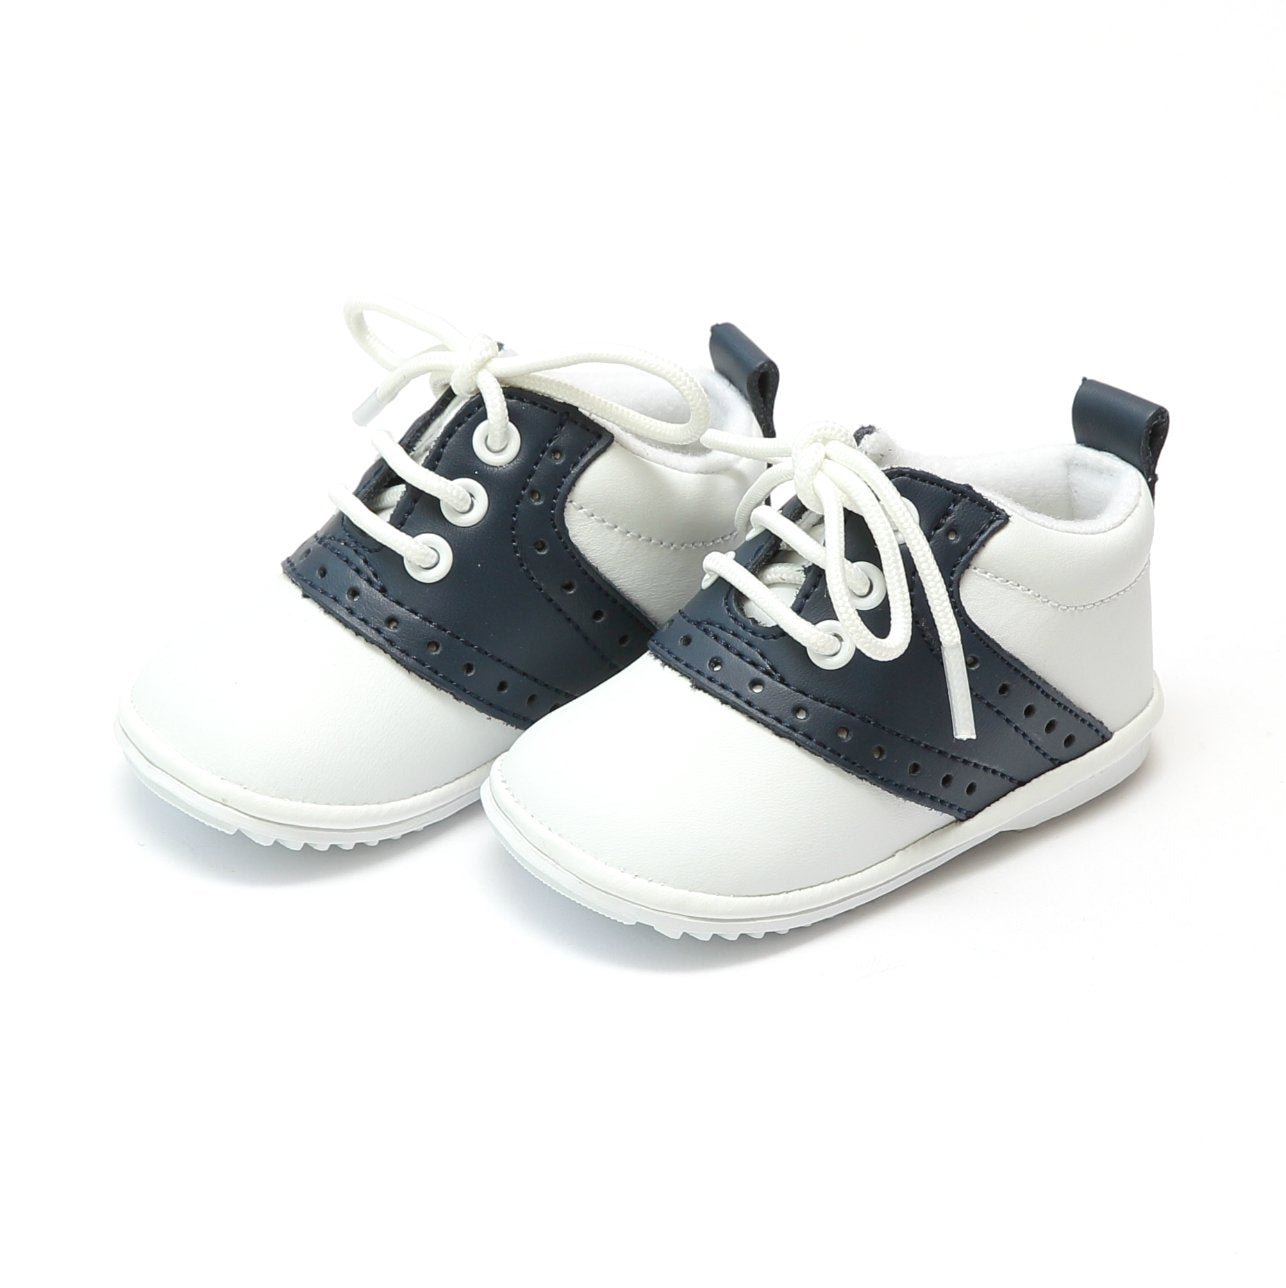 navy and white leather baby boys saddle oxford lace-up boots from L'Amour Shoes, available at Threadfare